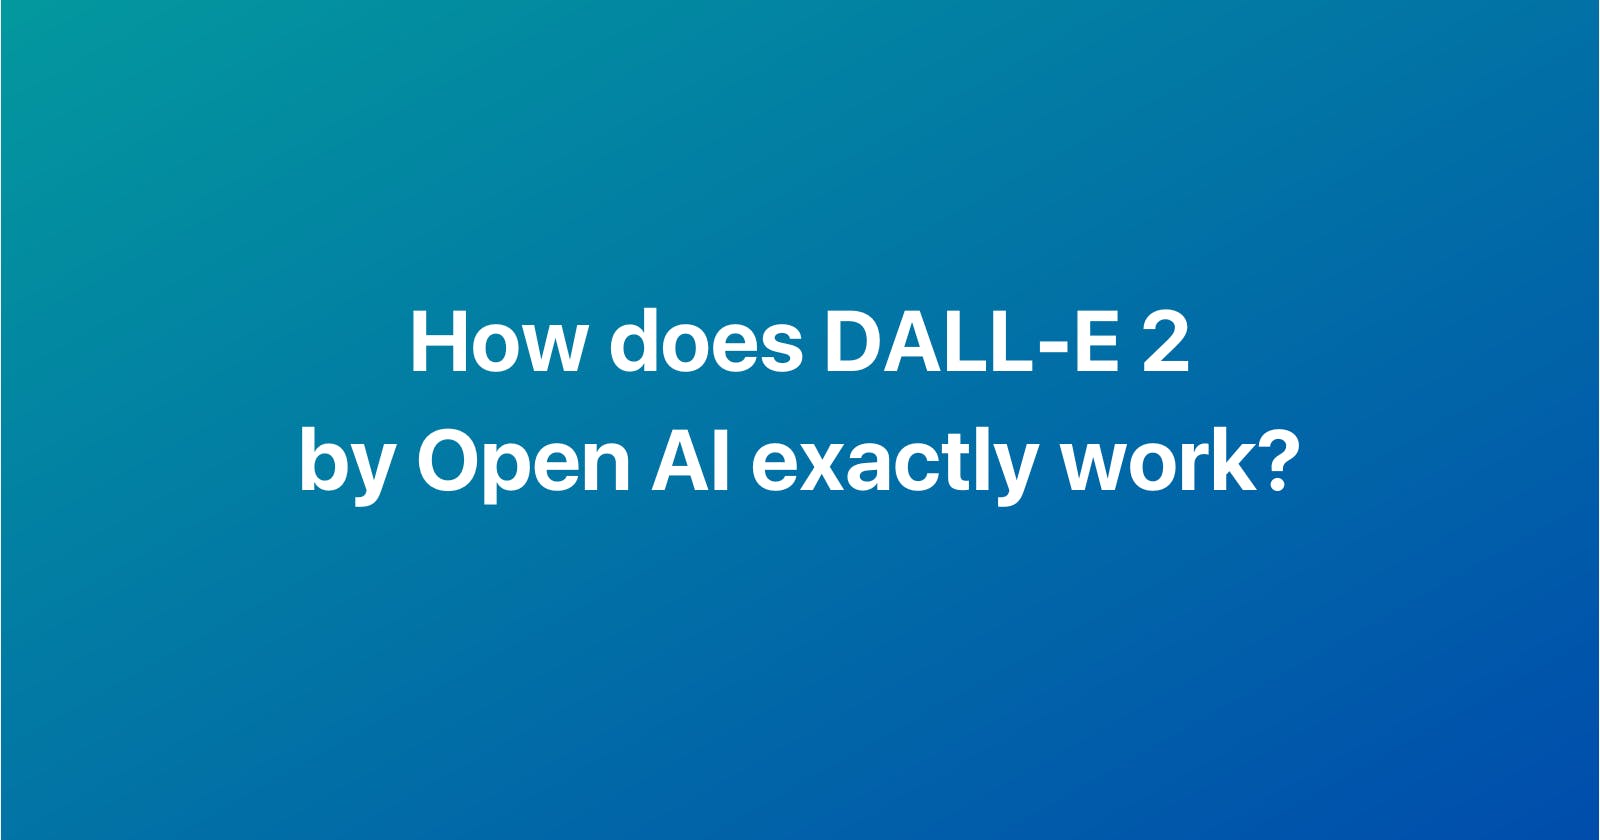 How does DALL-E 2 by Open AI exactly work?